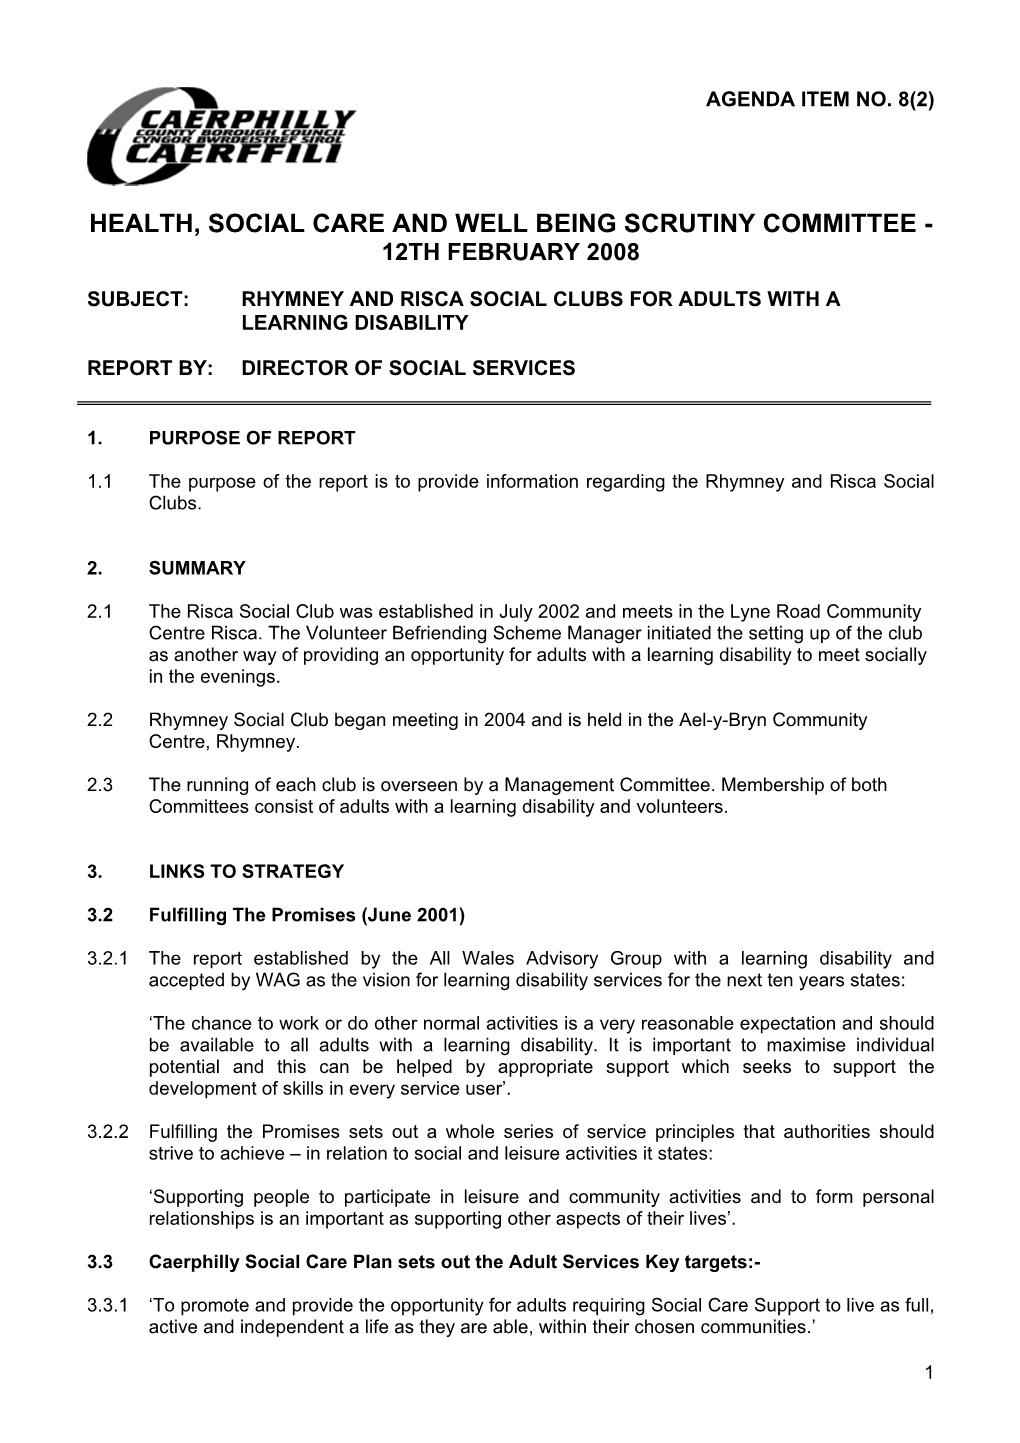 Health, Social Care and Well Being Scrutiny Committee - 12Th February 2008